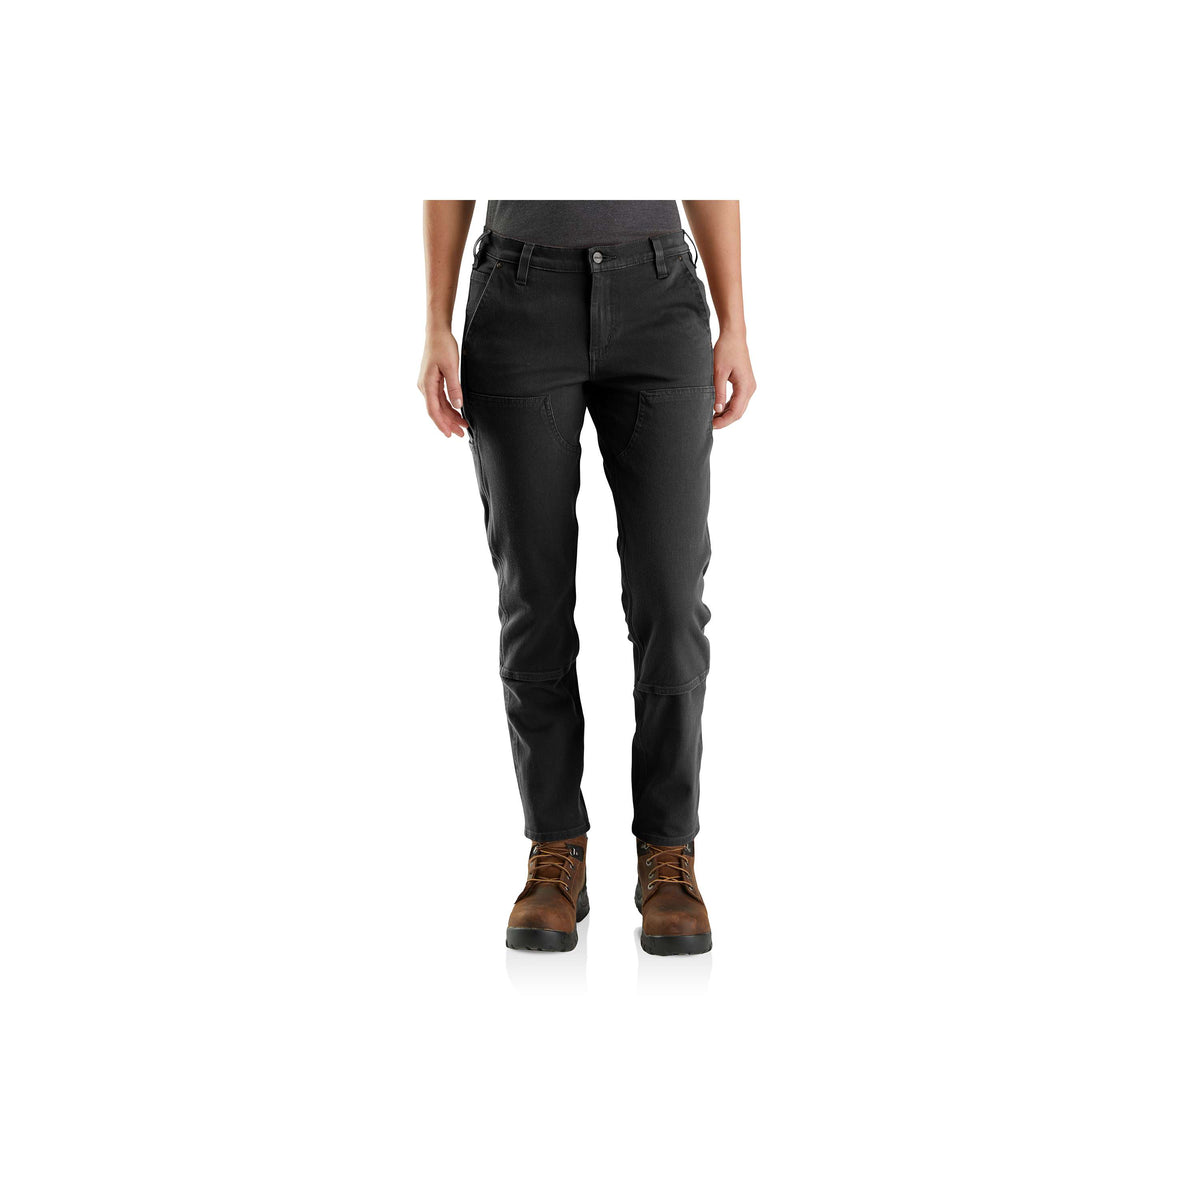 Carhartt Women's Loose Fit Mid-Rise Rugged Flex Crawford Pants at